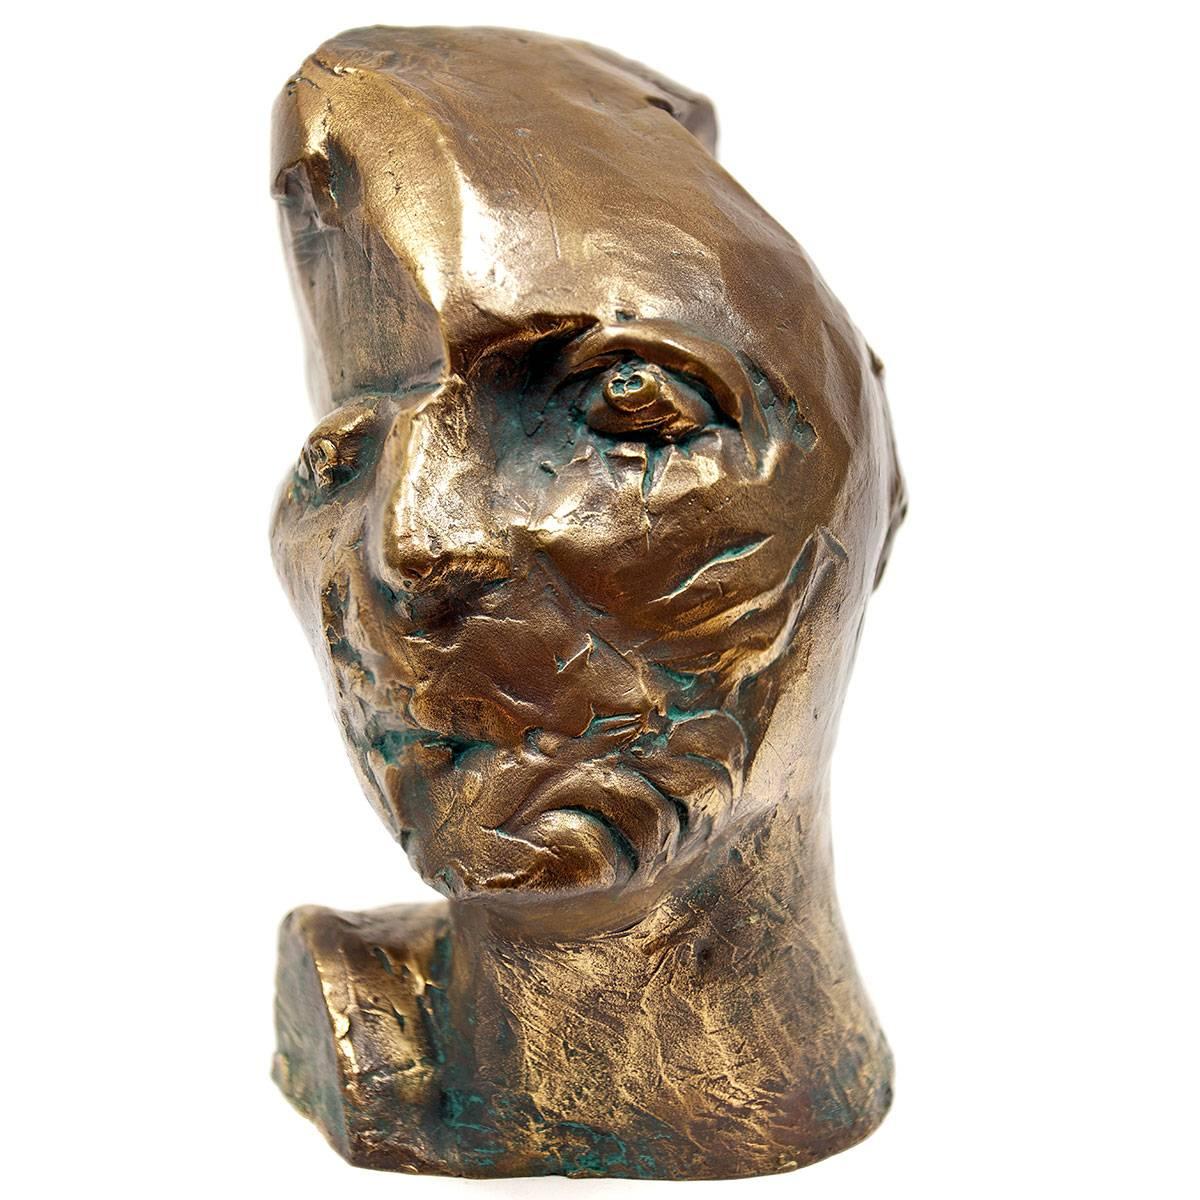 This is a bronze cast sculpture by Philip Pavia is part of his series of 